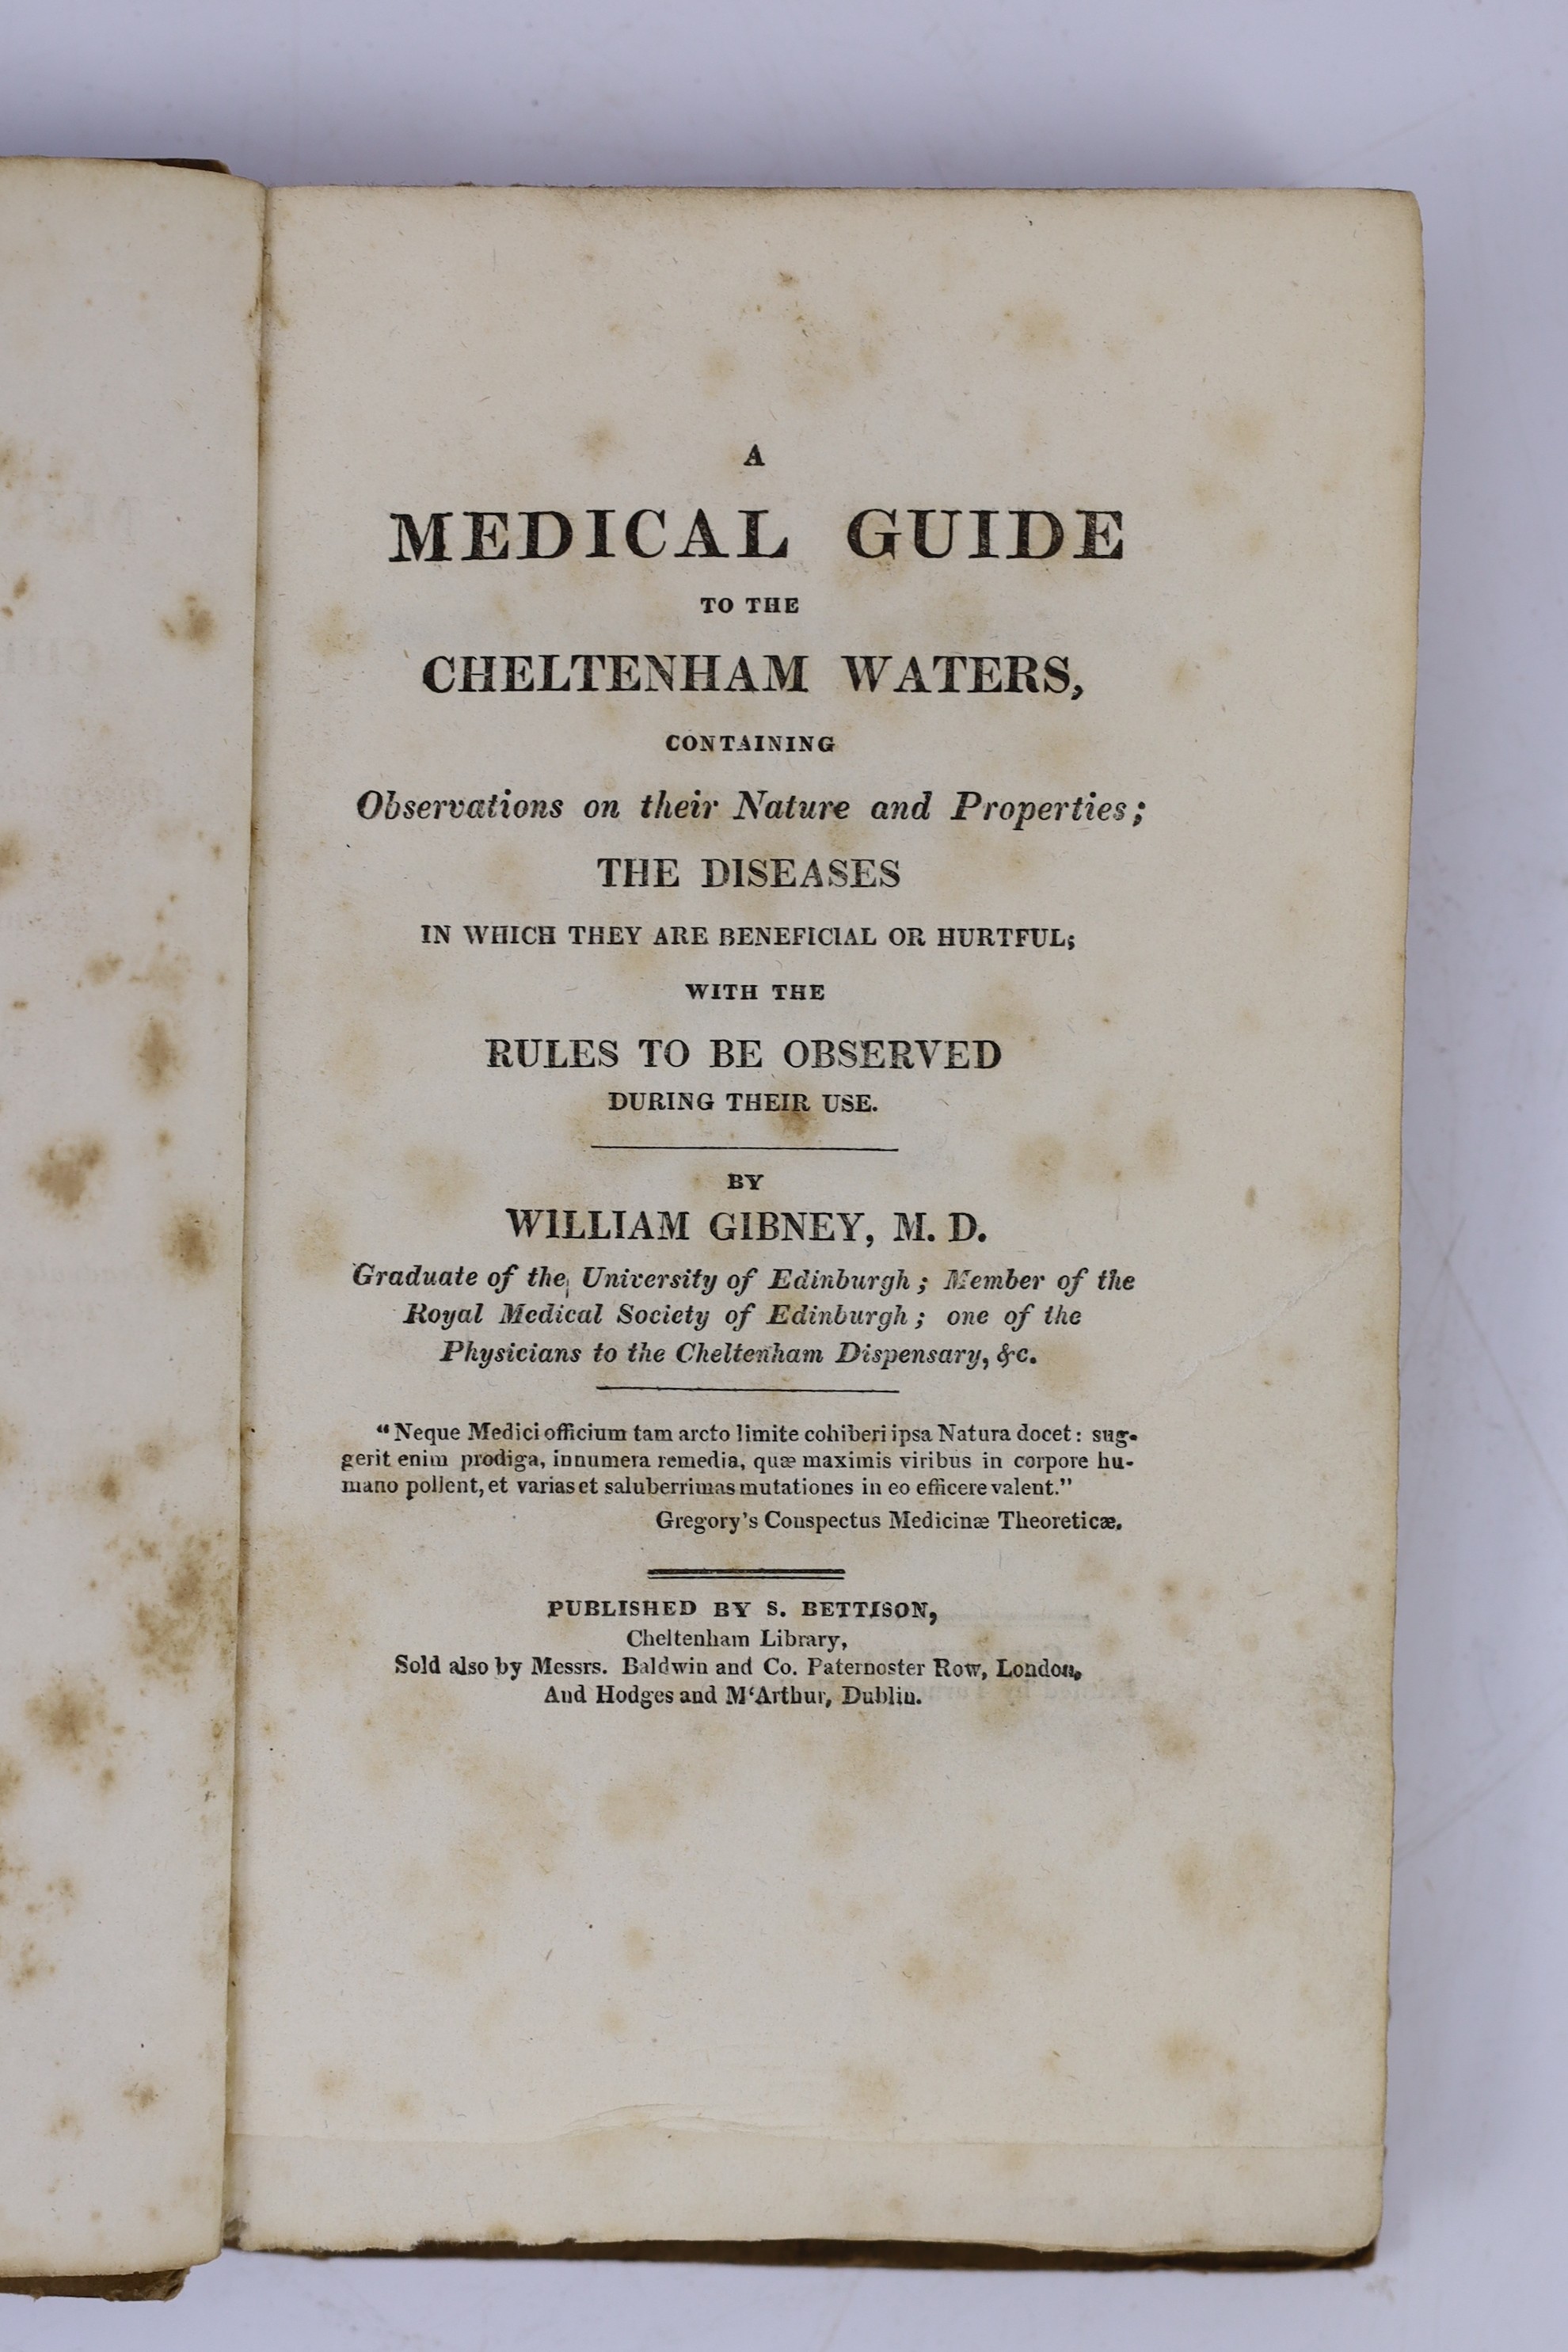 GLOUCS: Gibney, William - A Medical Guide to the Cheltenham Waters ... with the Rules to be Observed during their Use. original paper boards with printed label, uncut and partly unopened